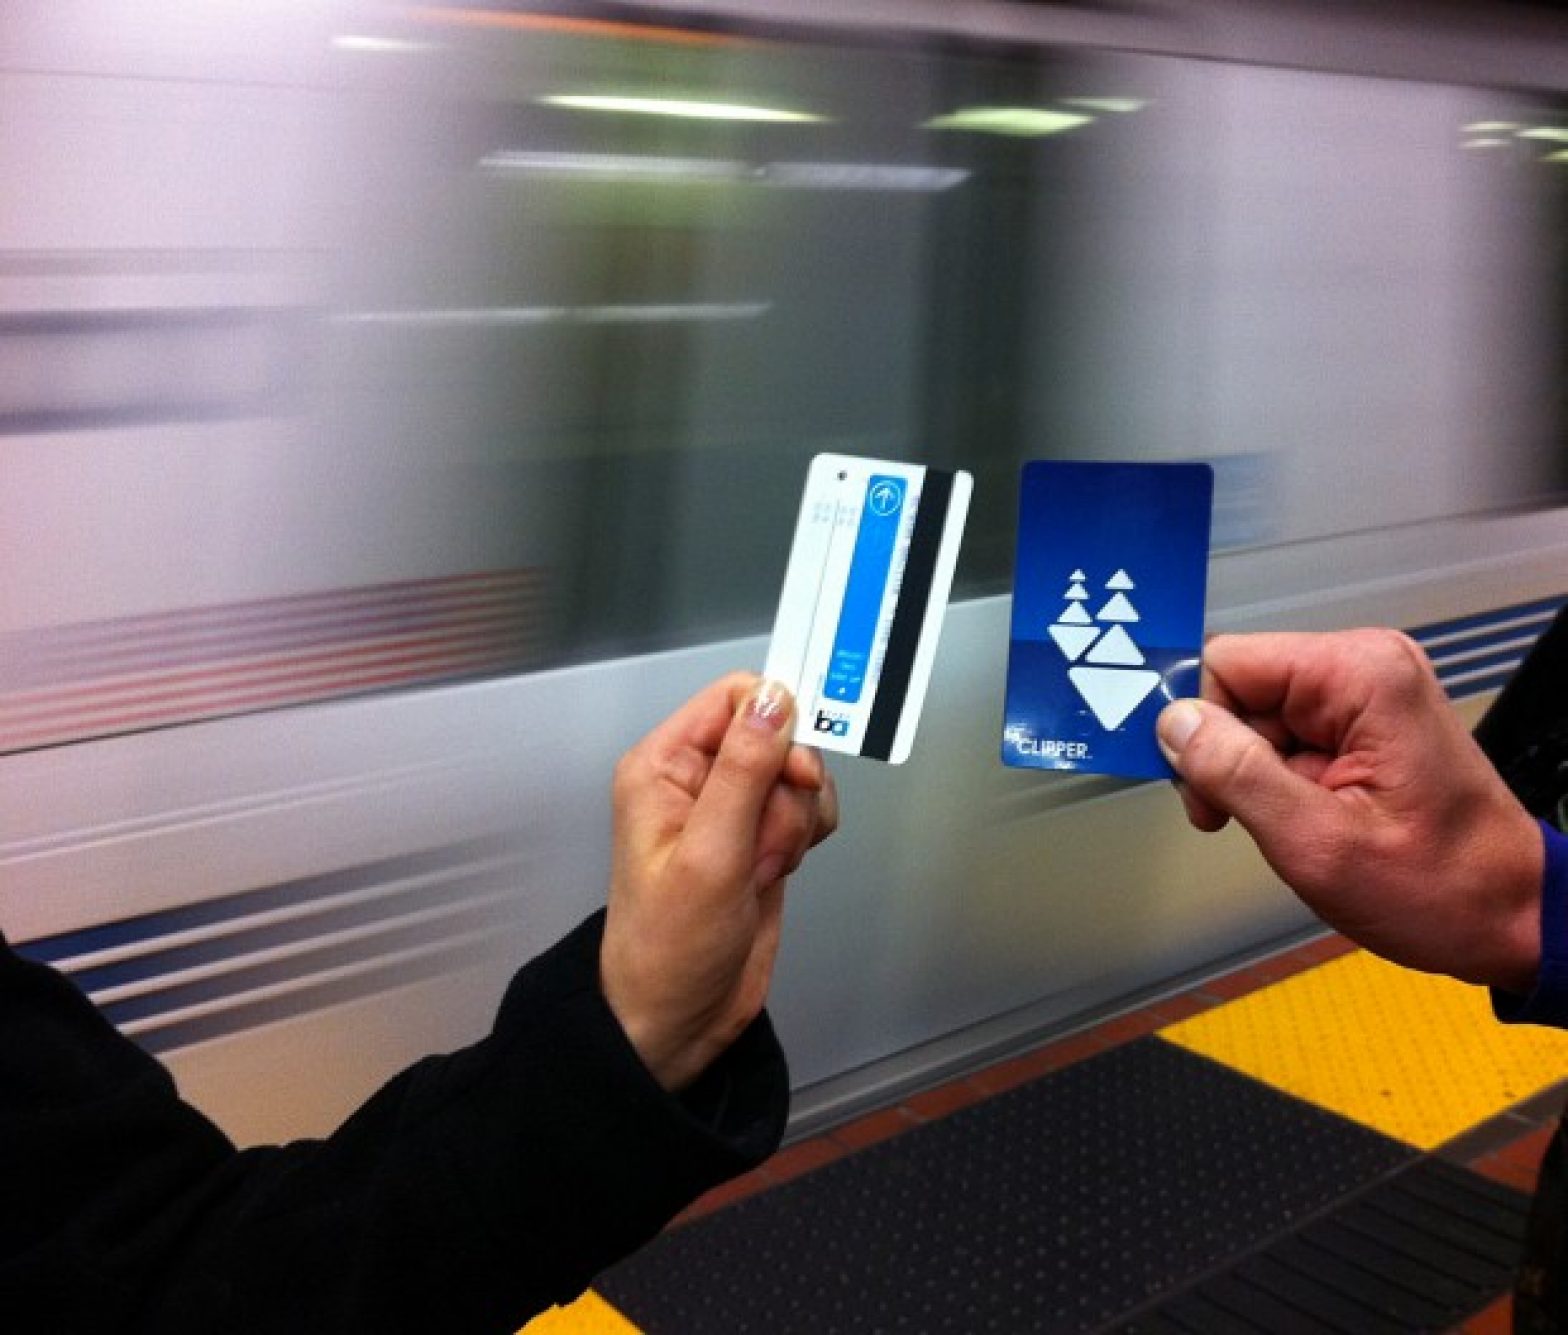 bart clipper card unlimited monthly